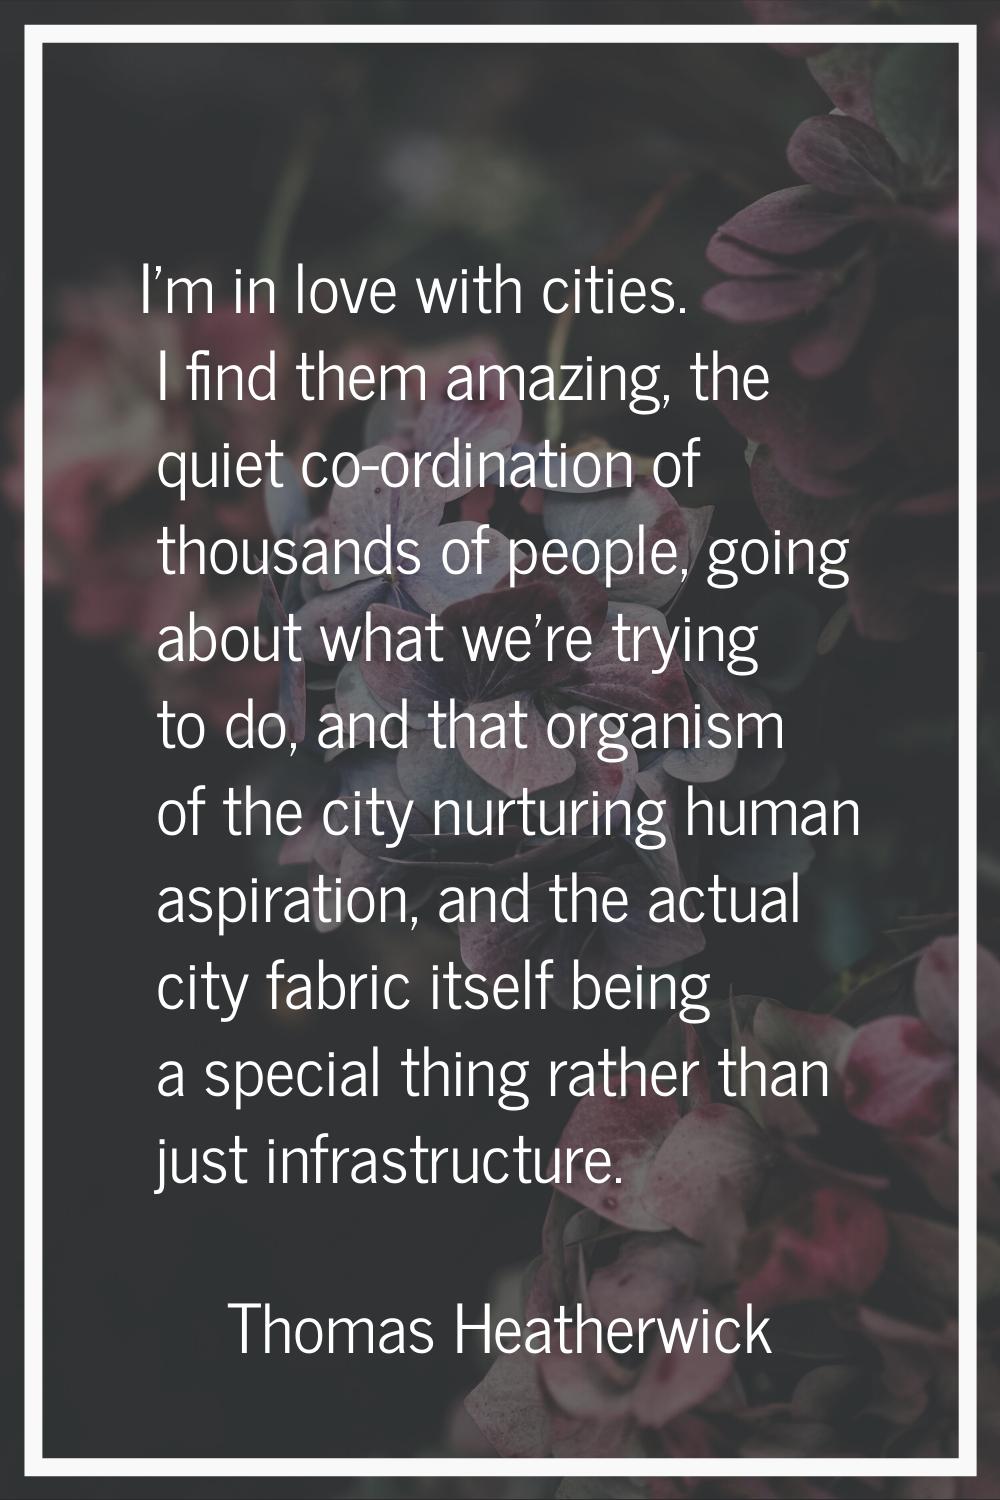 I'm in love with cities. I find them amazing, the quiet co-ordination of thousands of people, going